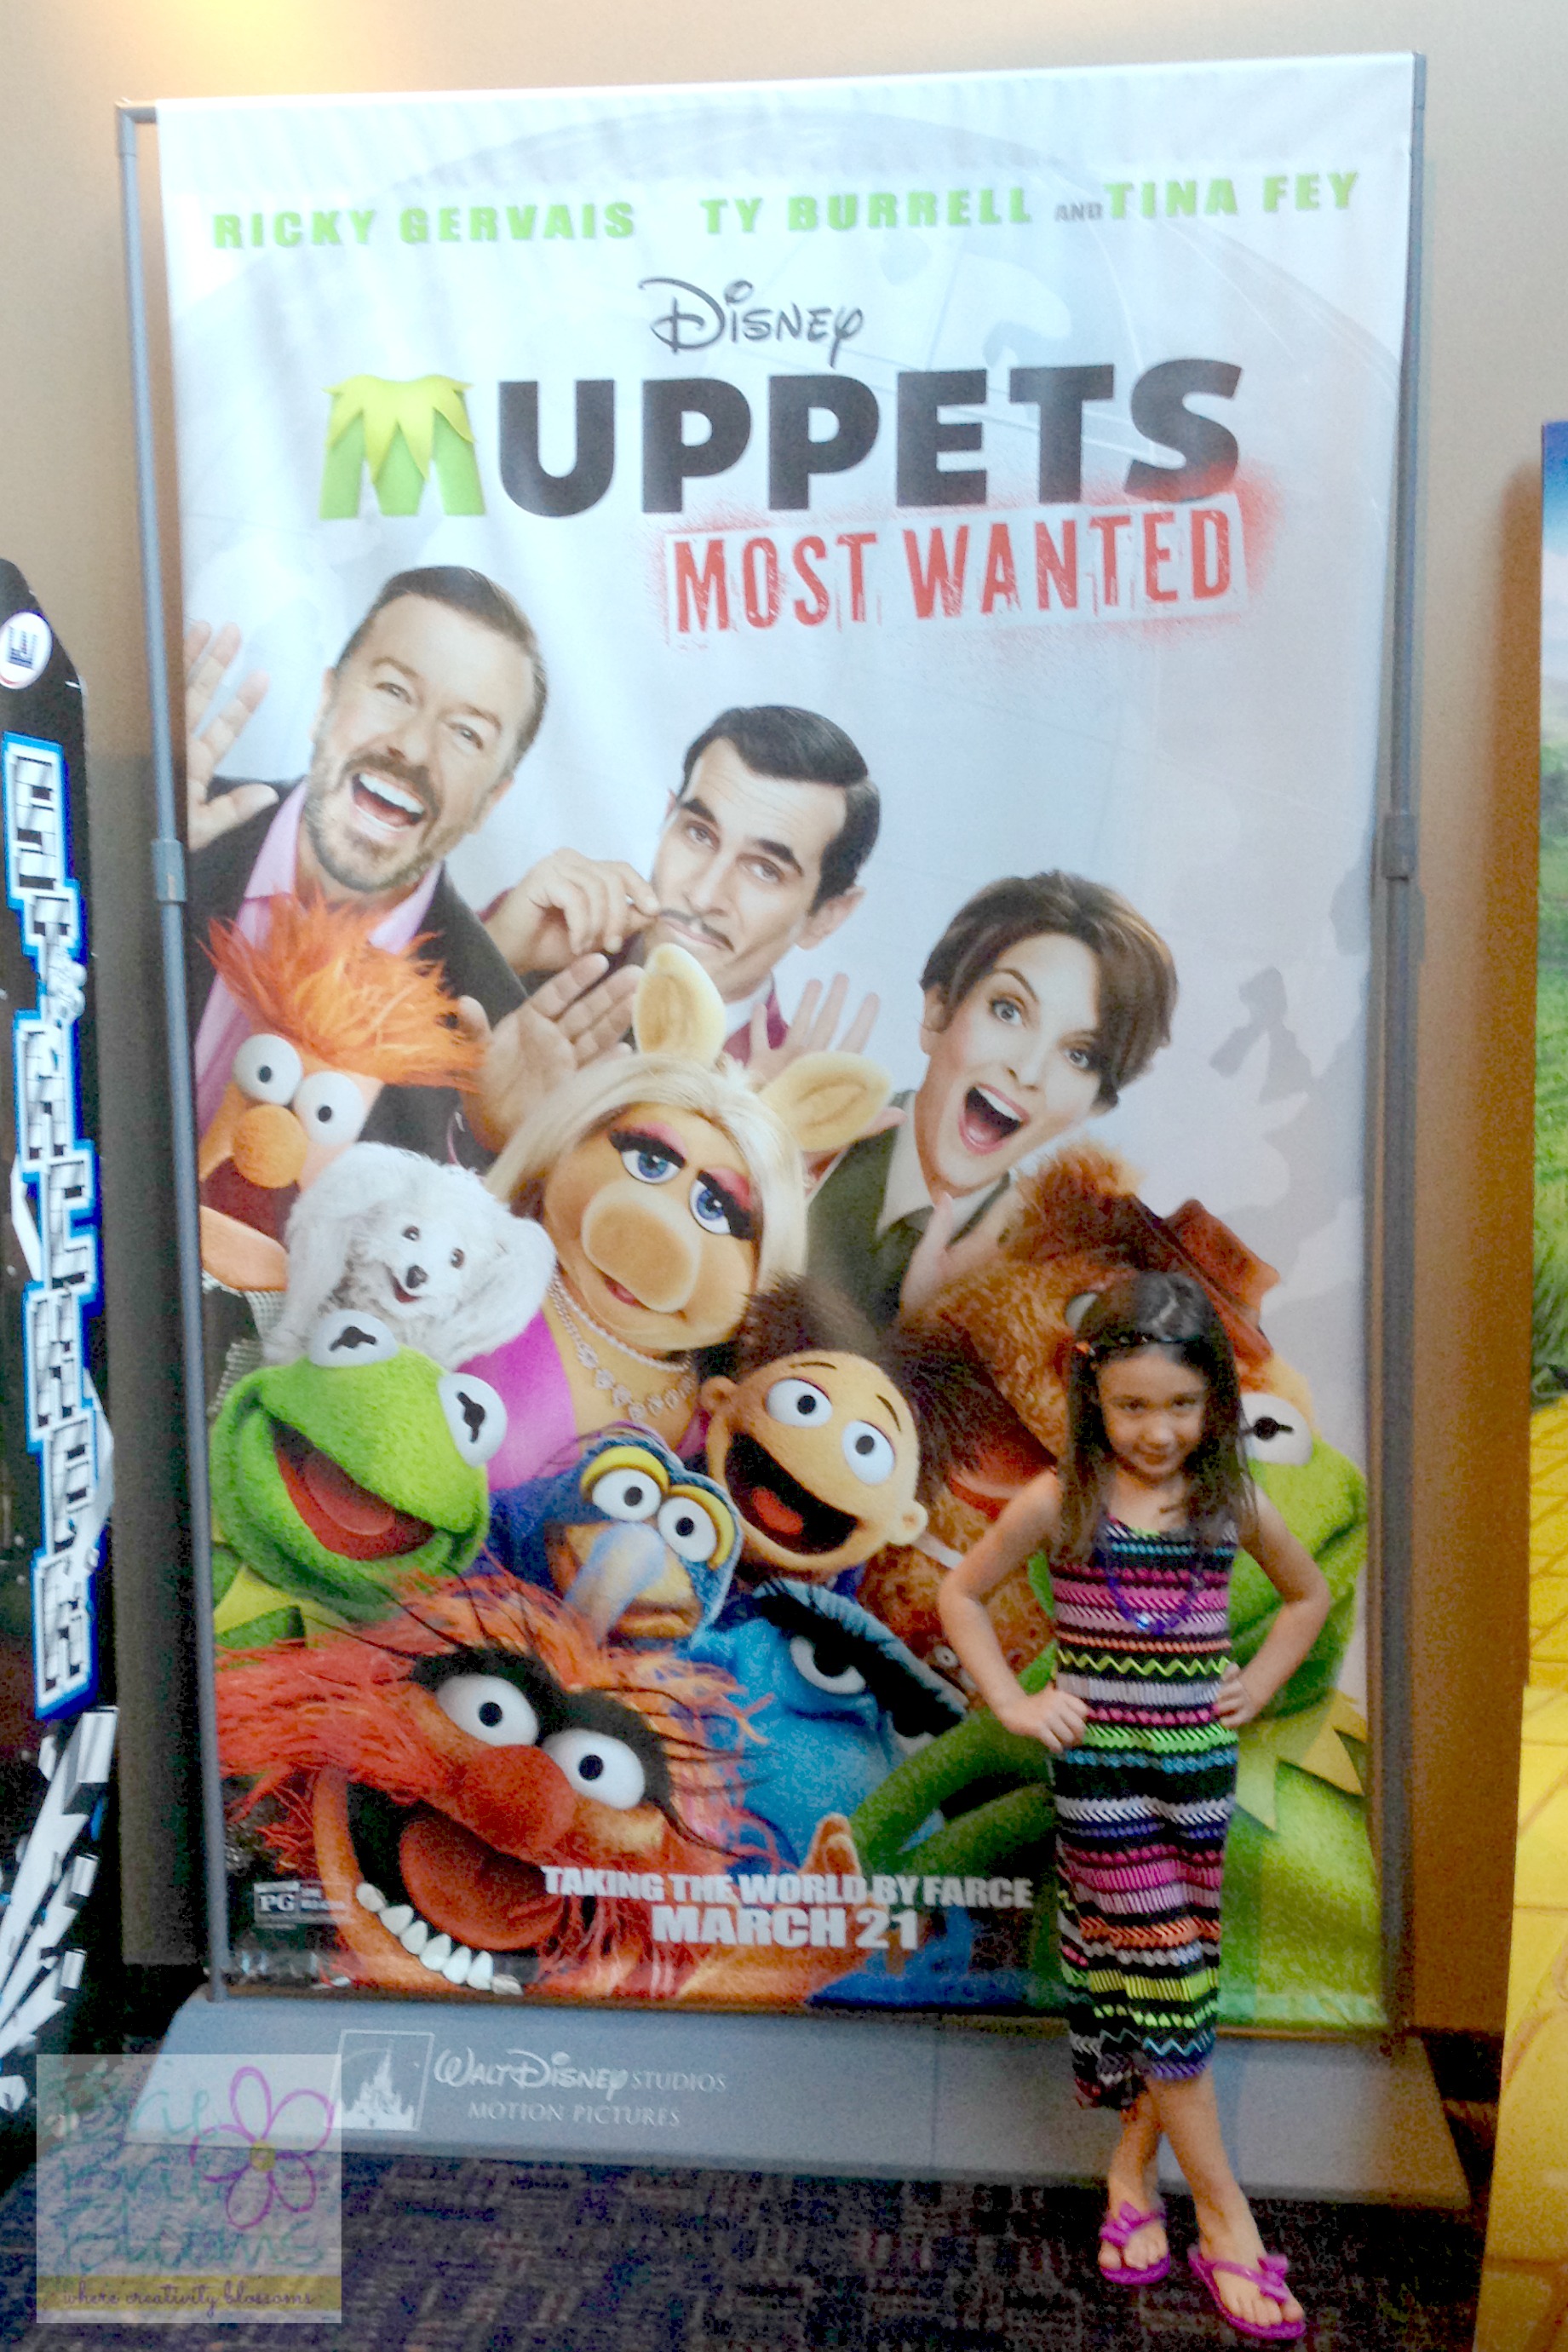 Disney Muppets Most Wanted in theaters March 21